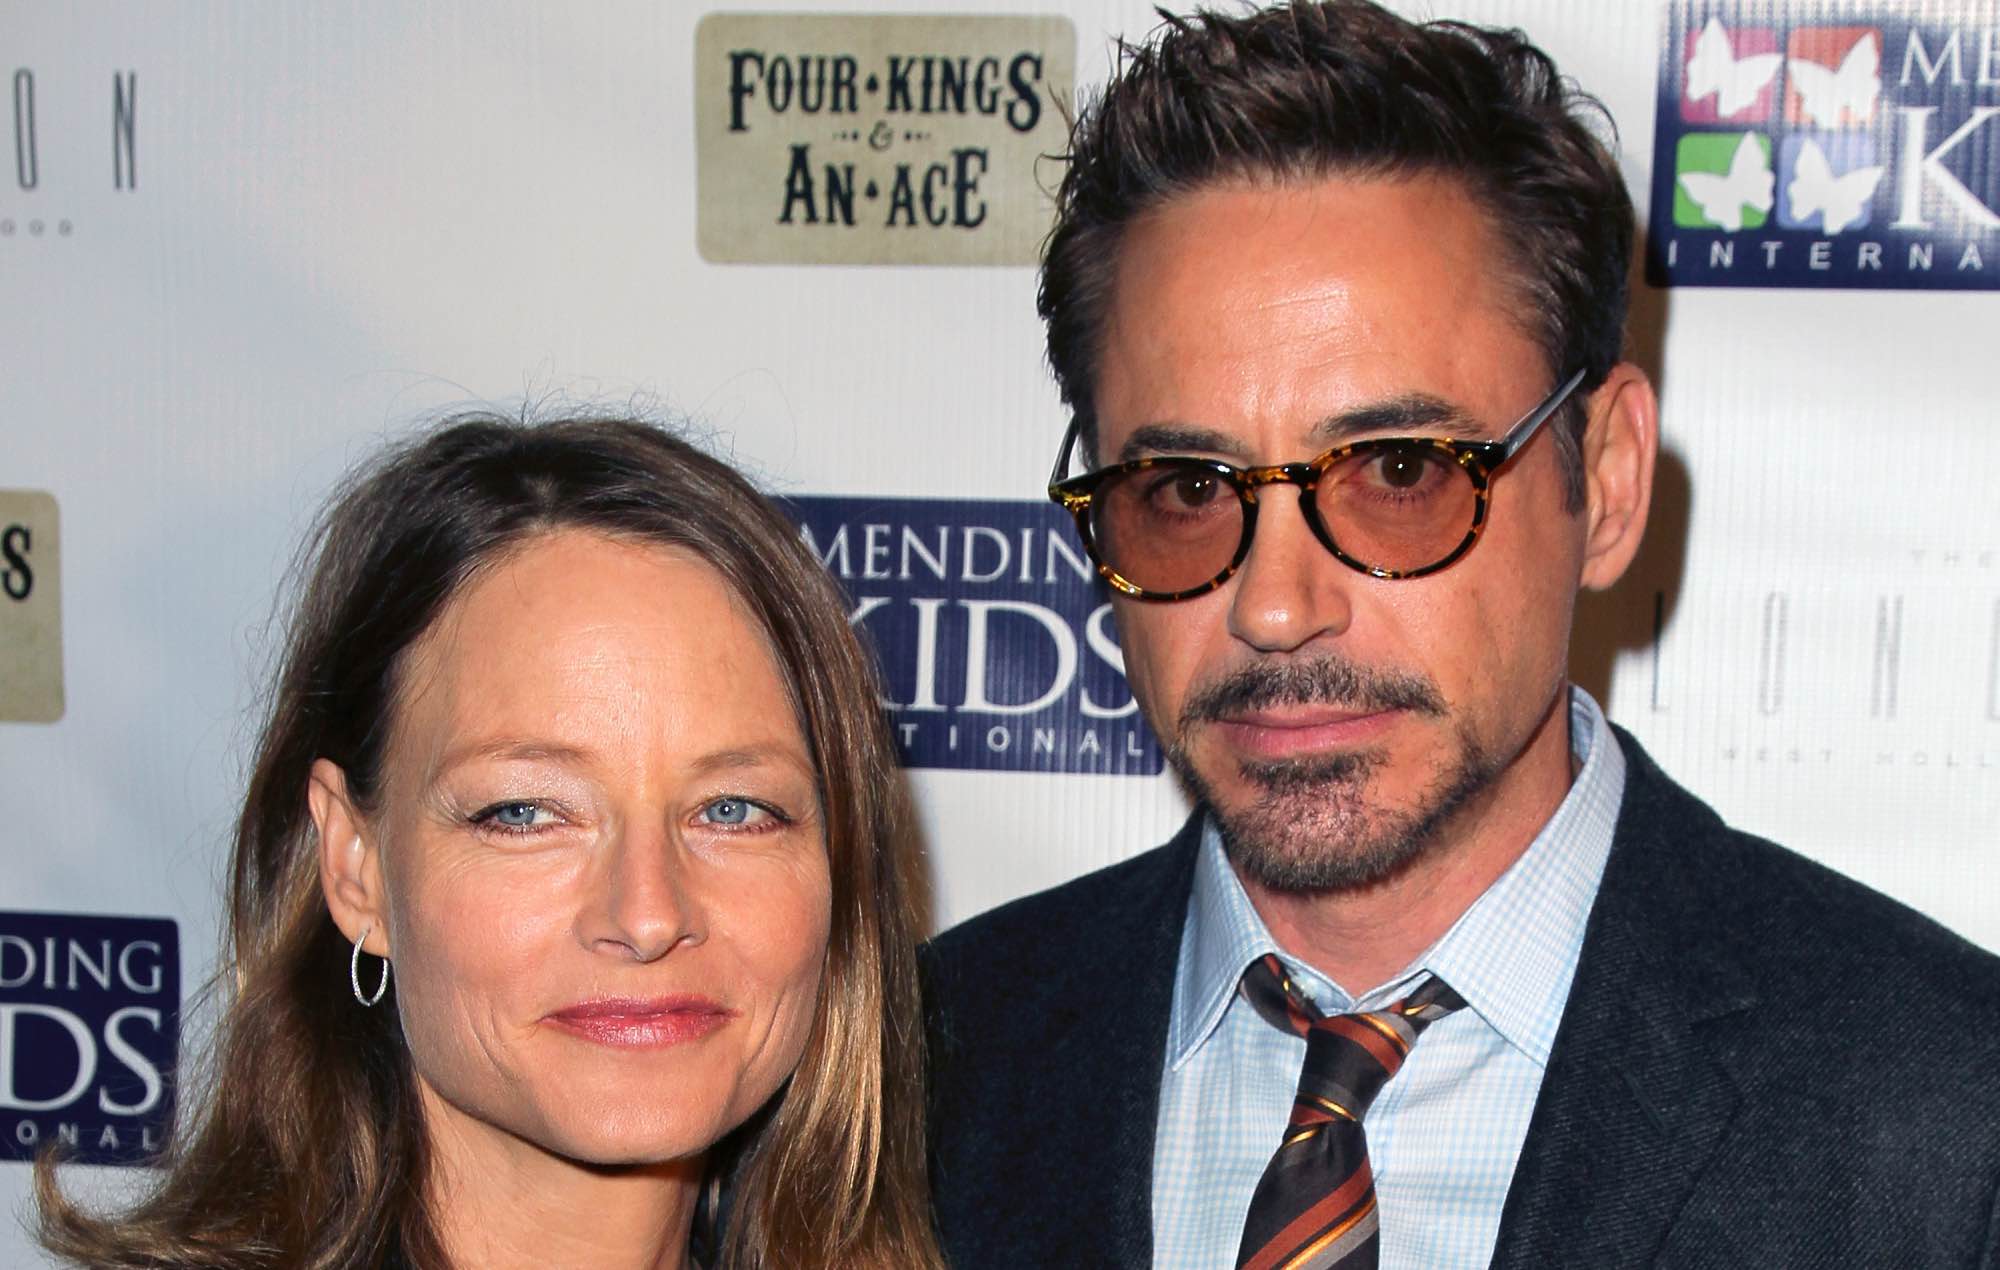 Jodie Foster confronted Robert Downey Jr. over his addictions on film set